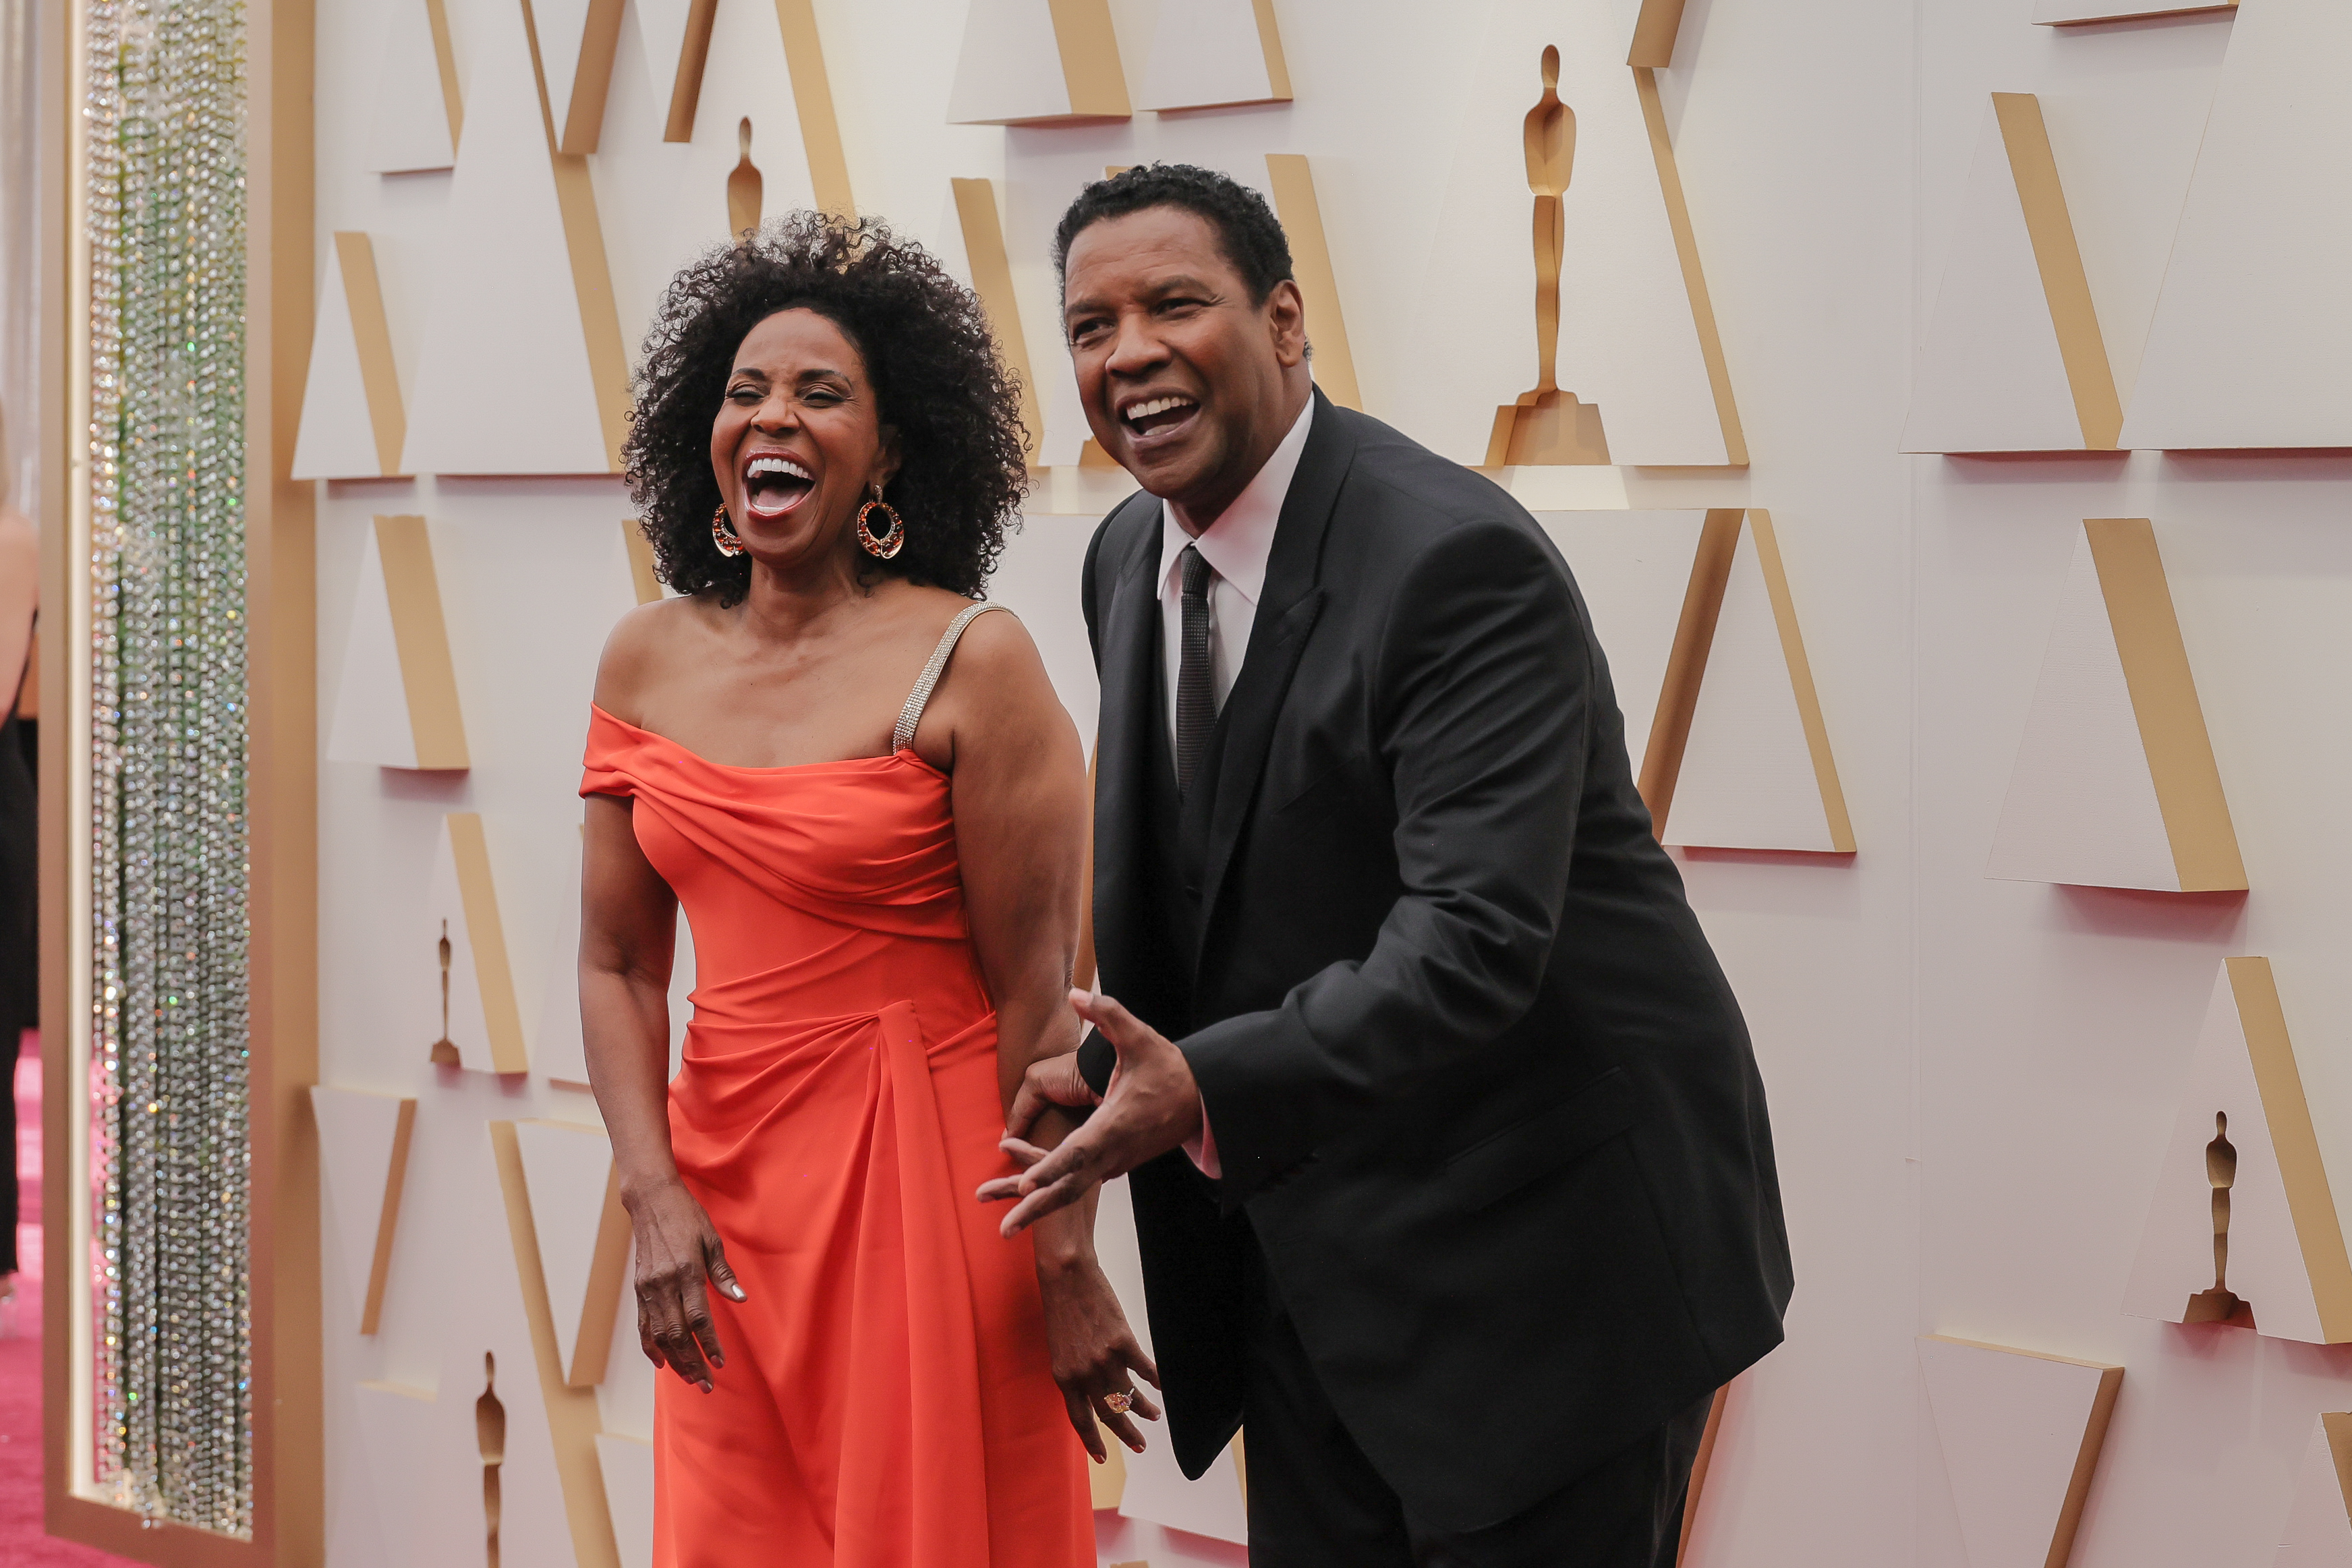 Pauletta Washington and Denzel Washington in Hollywood, California on March 27, 2022 | Source: Getty Images